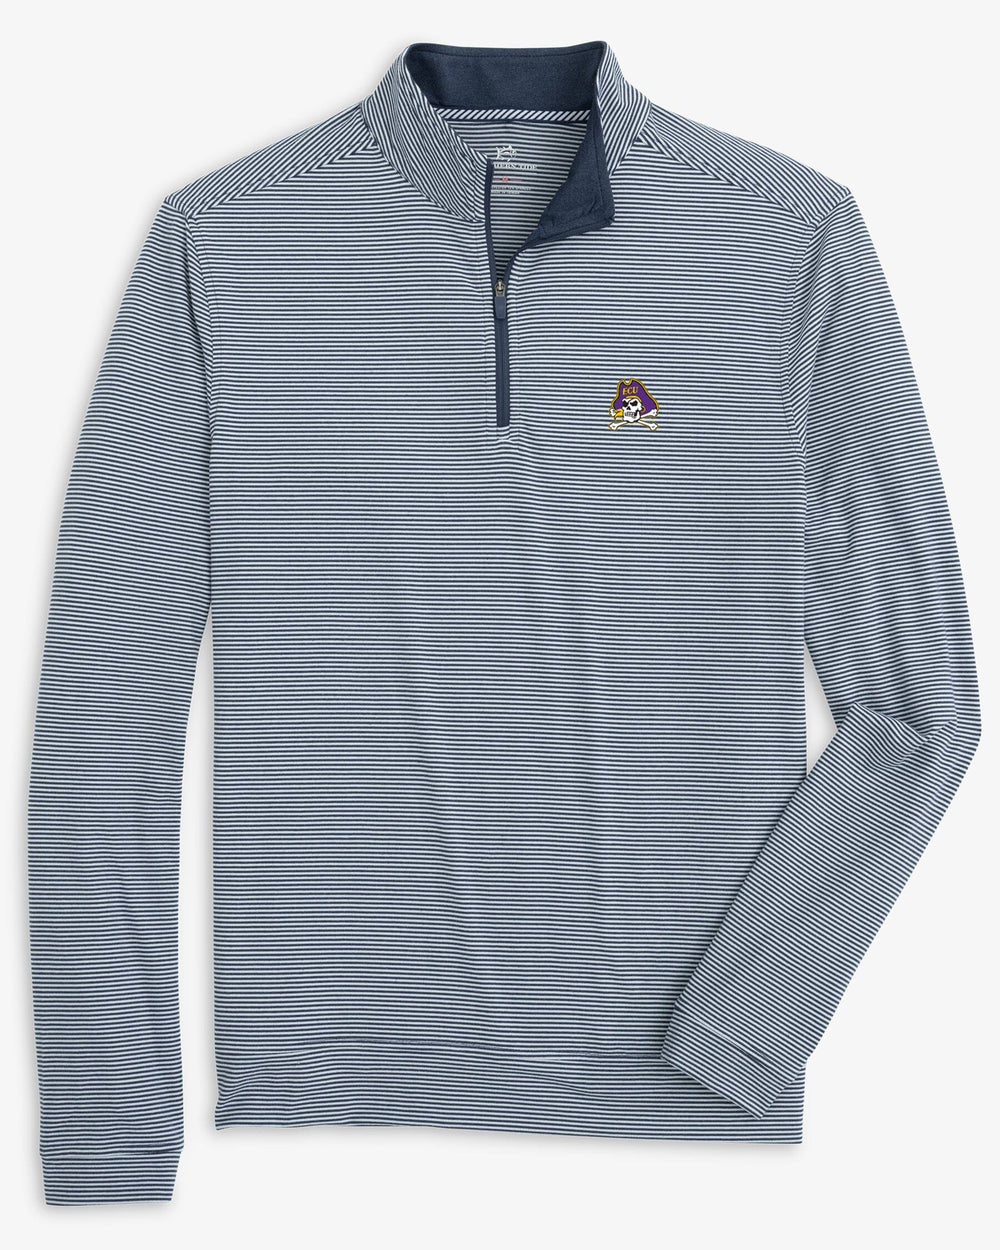 The front view of the East Carolina Cruiser Micro-Stripe Heather Quarter Zip by Southern Tide - Heather Navy